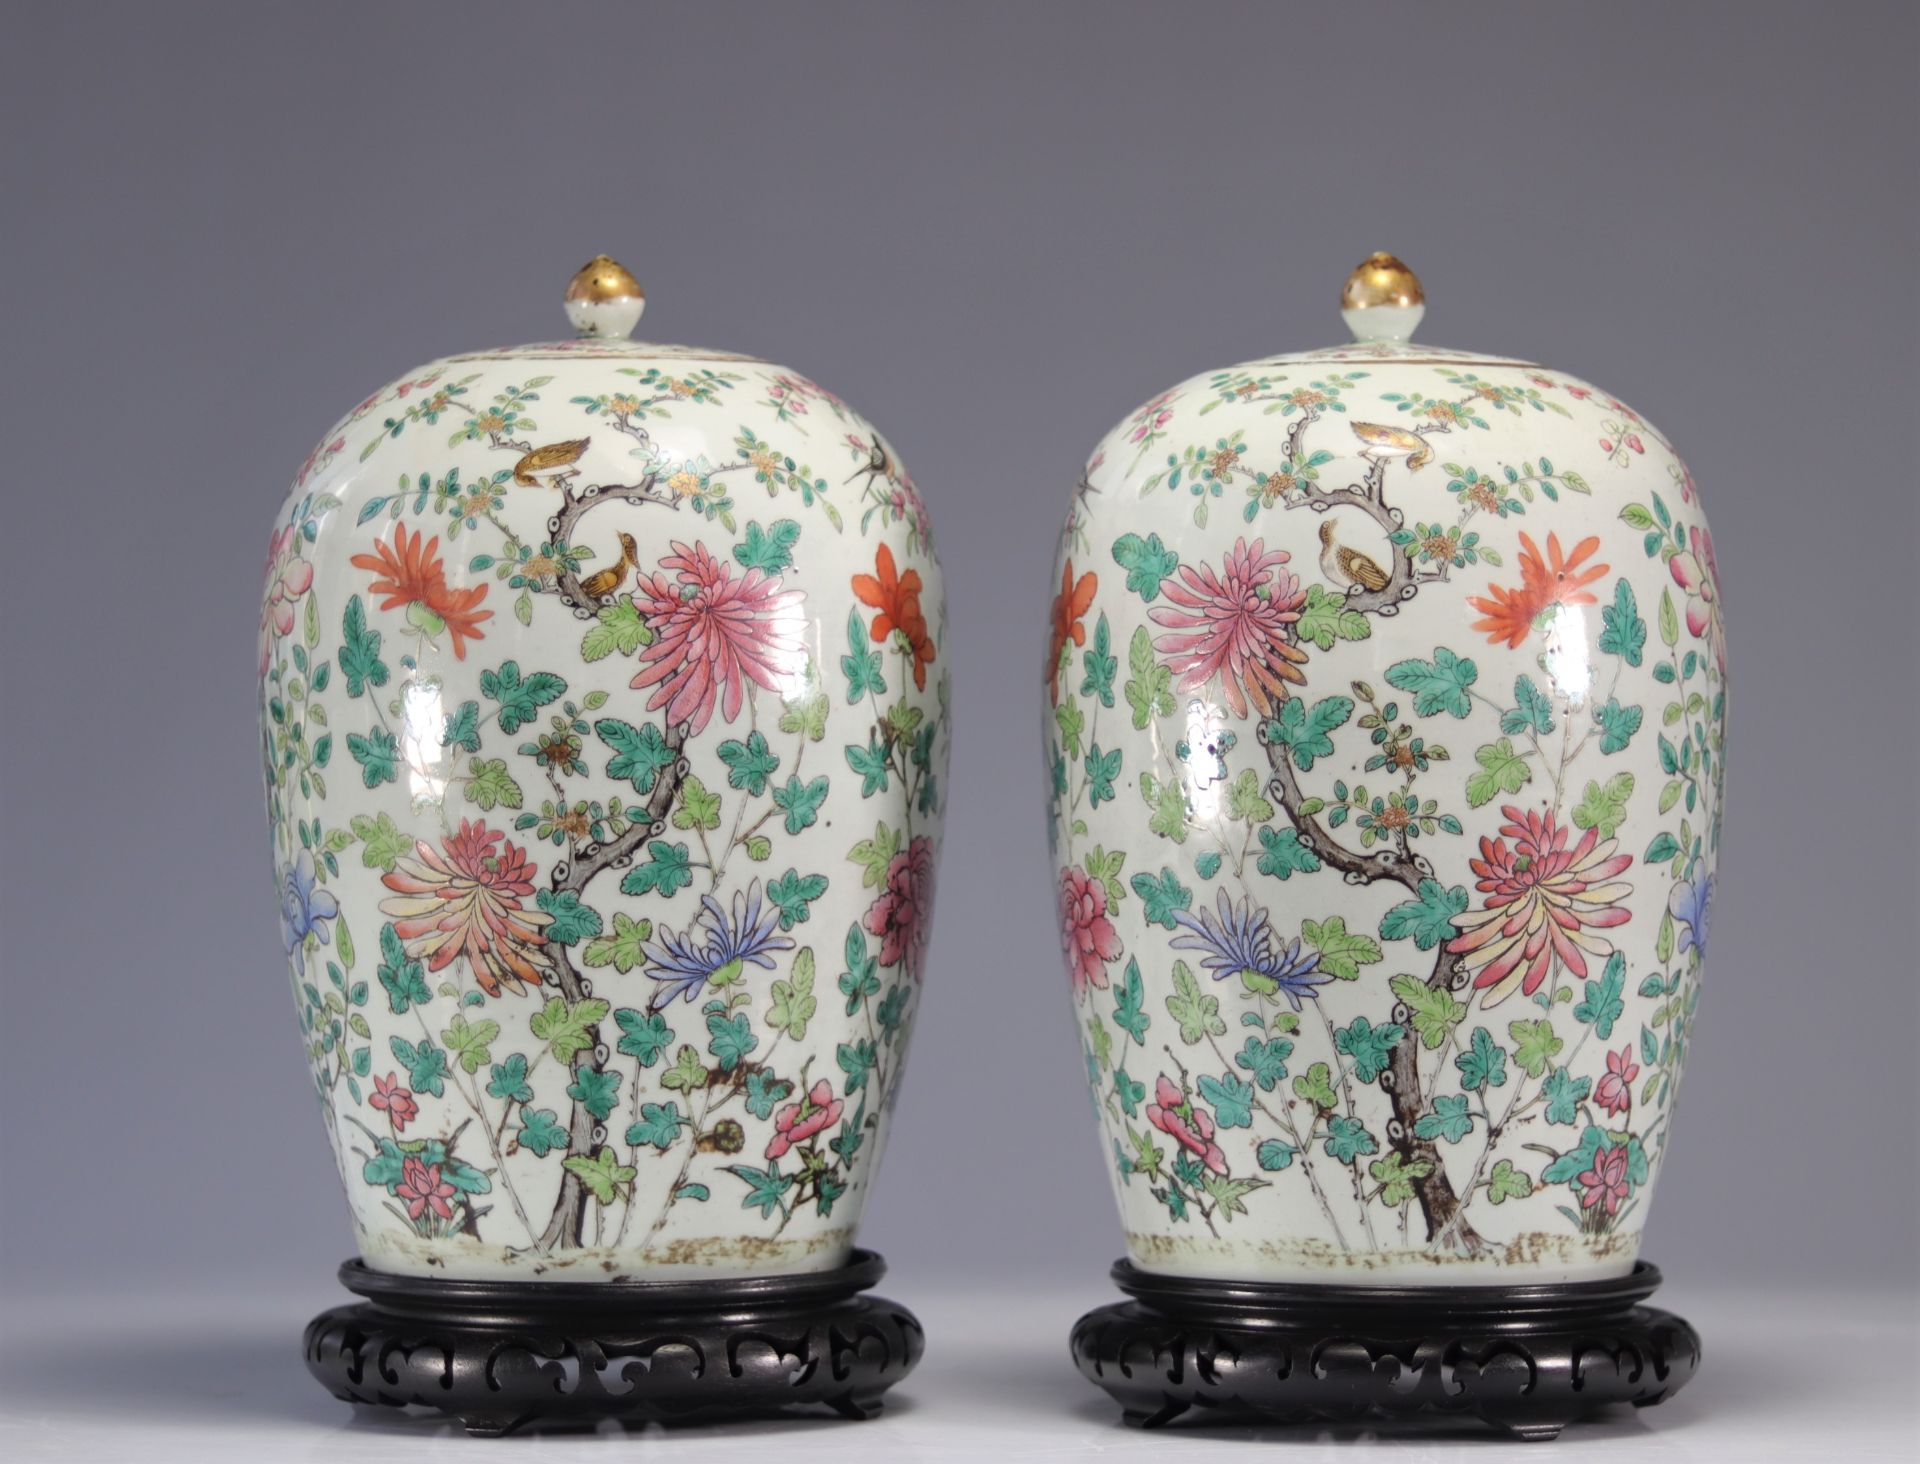 Pair of covered vases in famille rose porcelain with floral and bird decoration